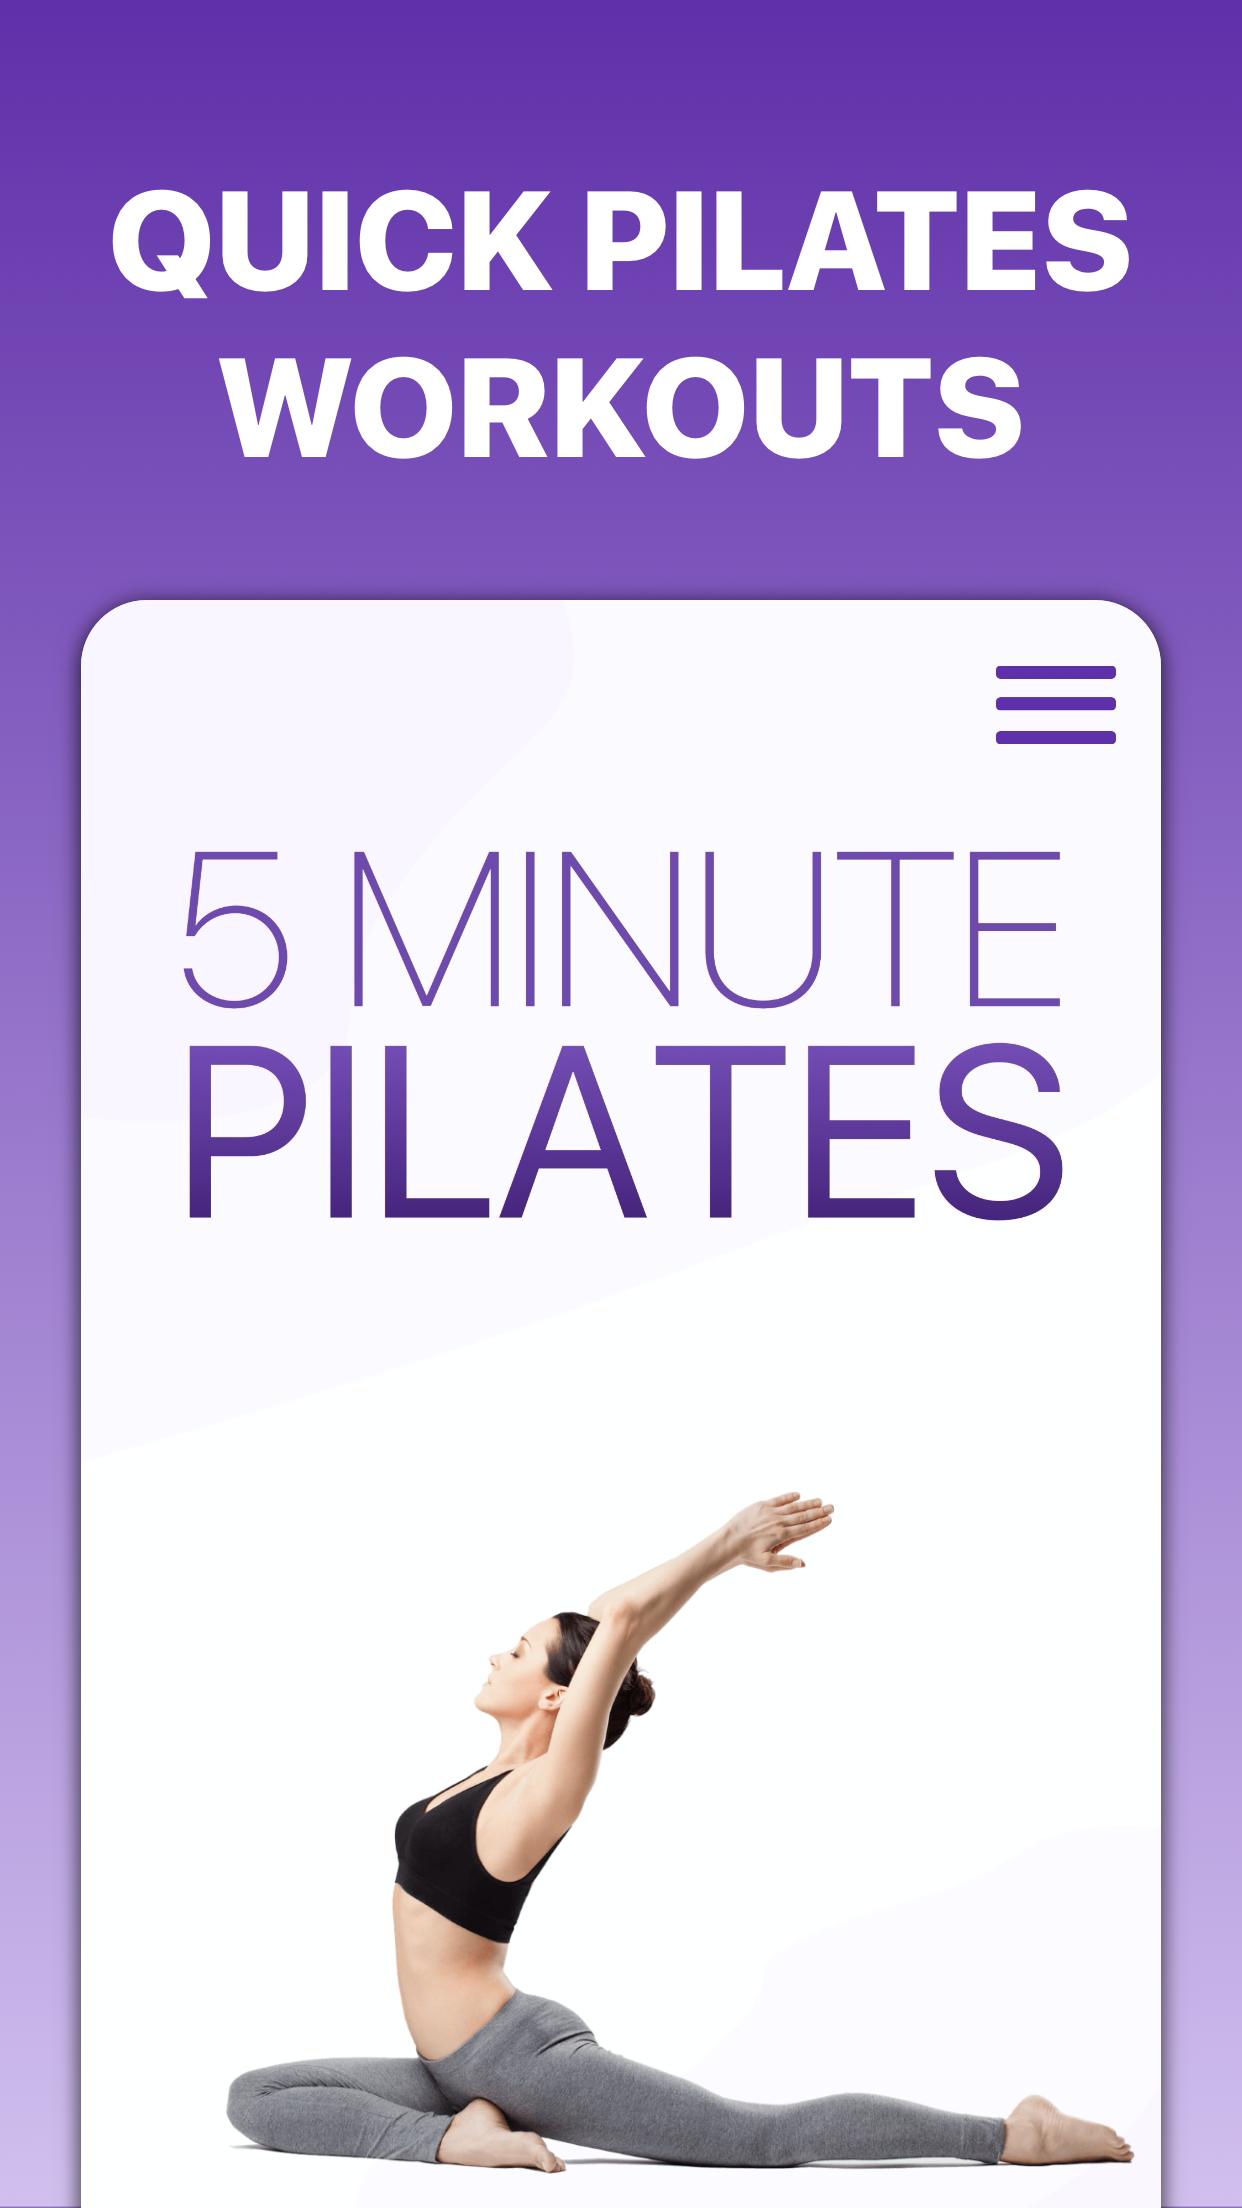 5 Minute Pilates for Android - APK Download